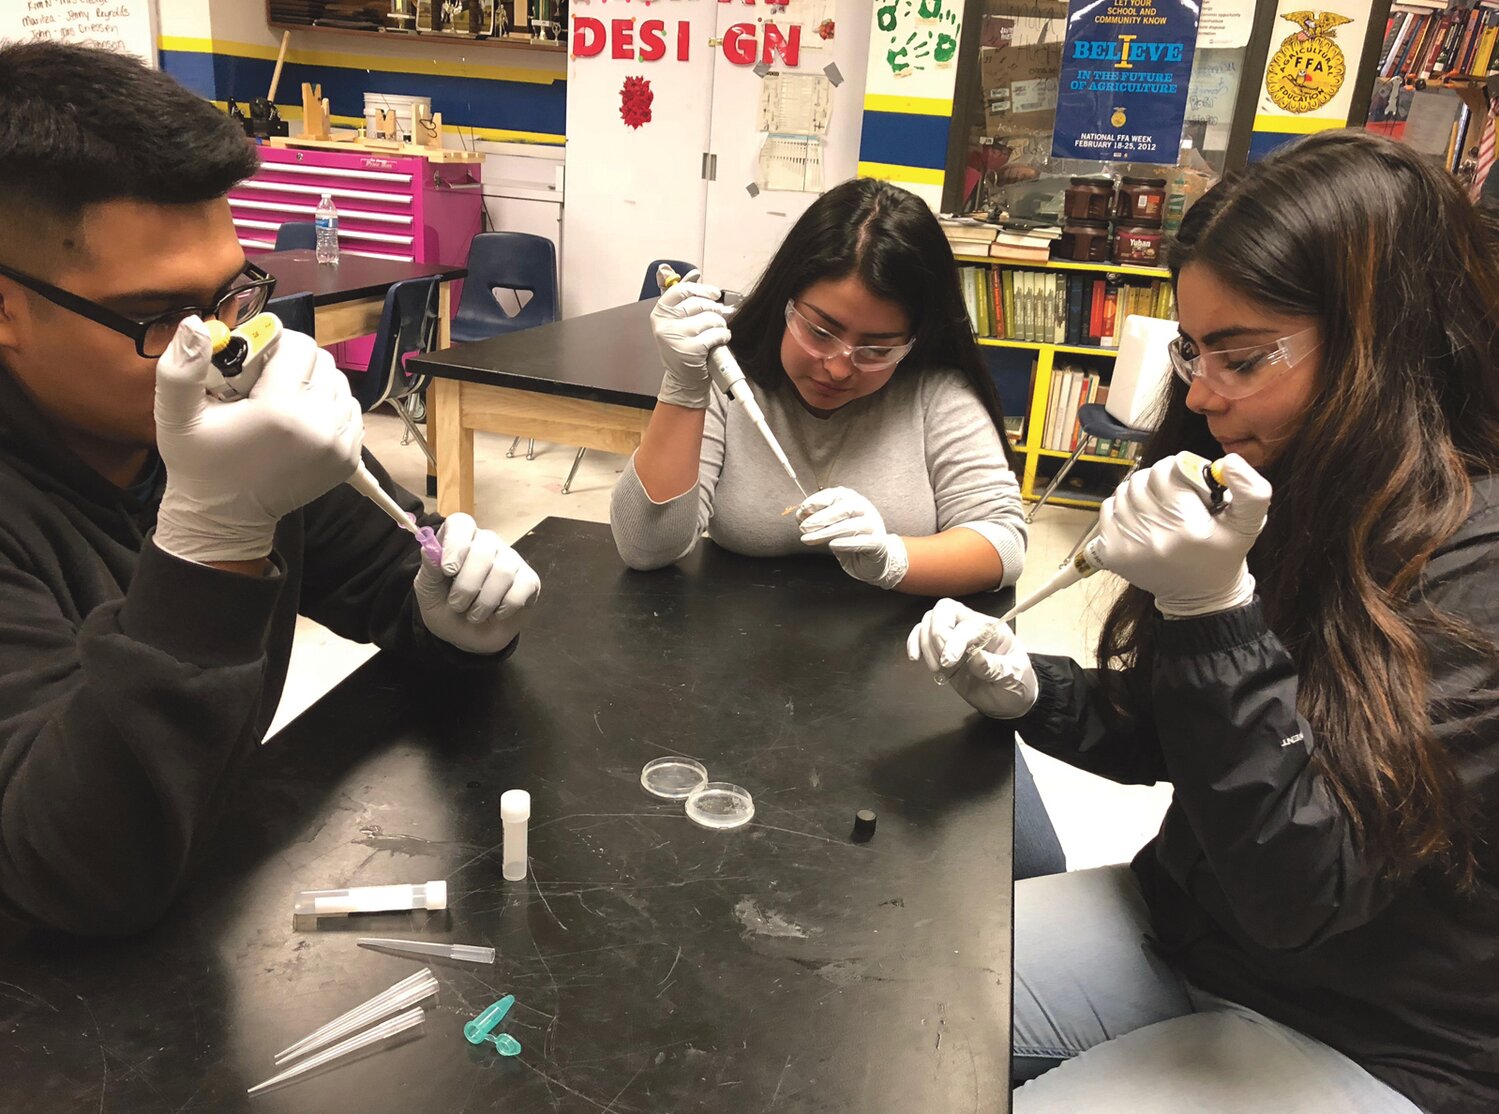 Brewster FFA students Miguel Fernandez, Citaly Pamatz, and Alexia Hurtado wield micro pipettes to work on a gene transformation lab project.